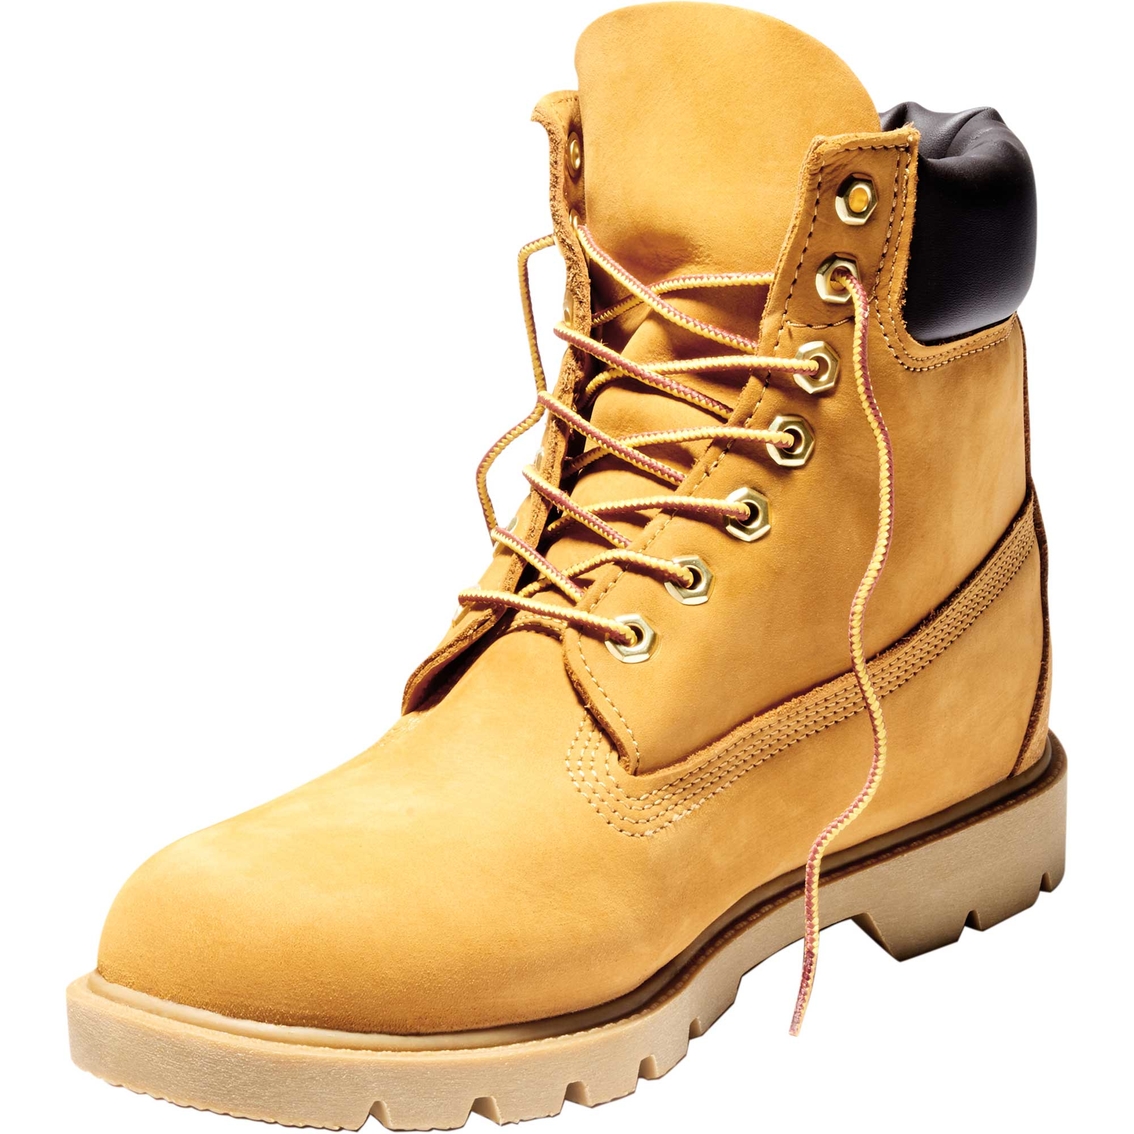 Timberland Classic 6 in. Boots - Image 2 of 7